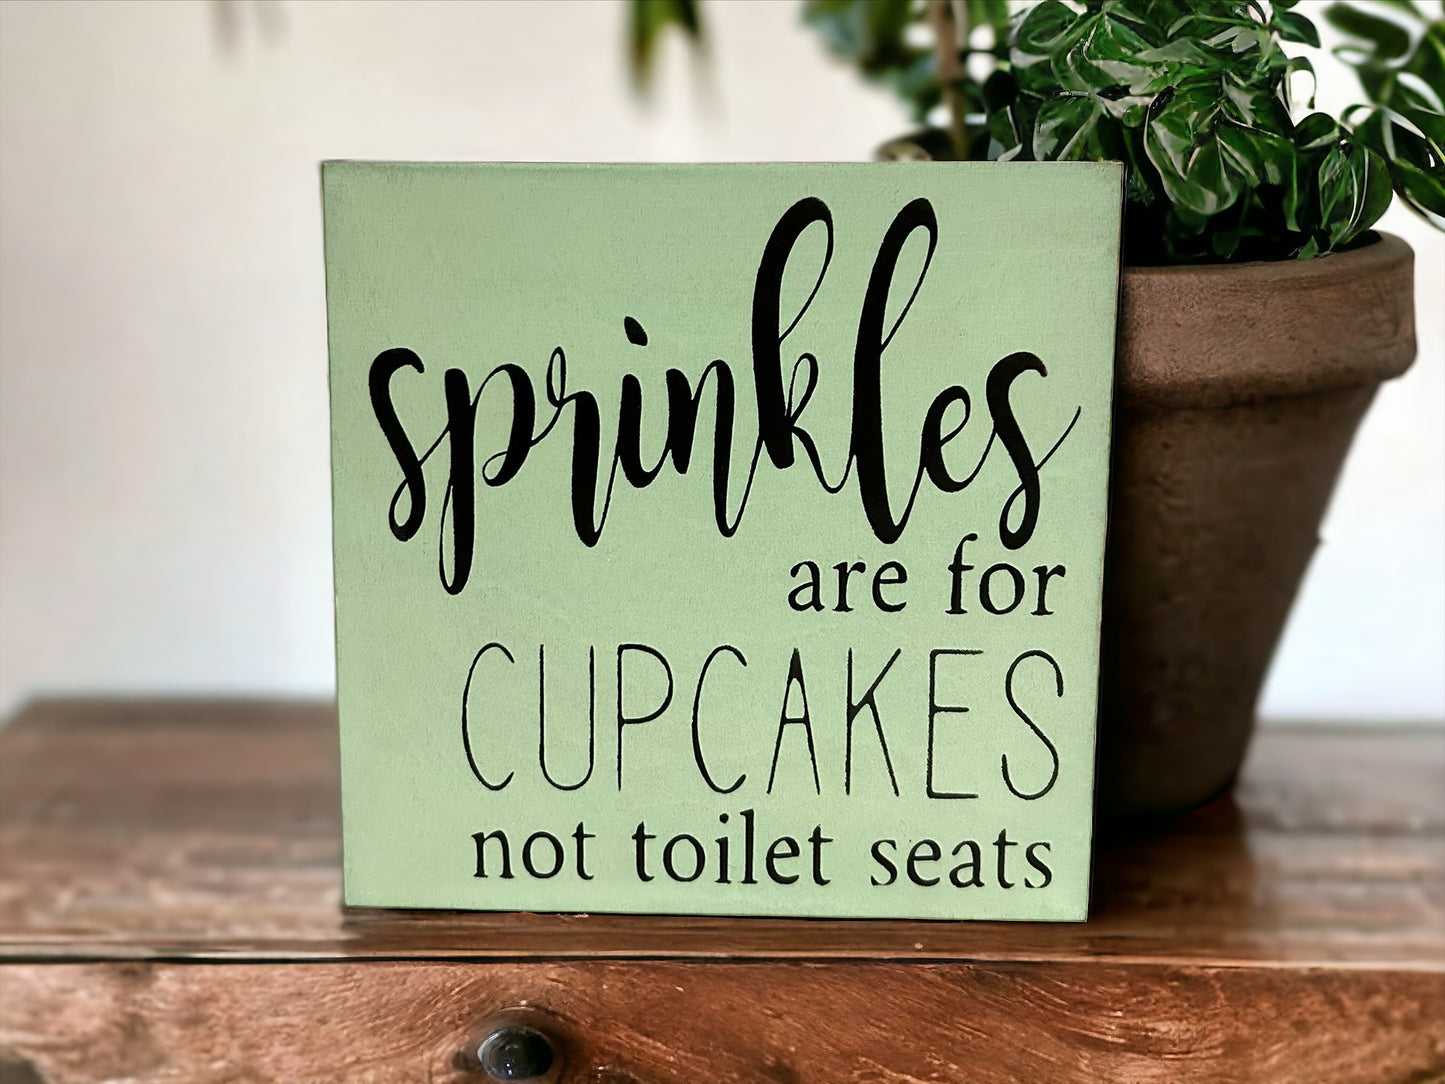 Sprinkles are for Cupcakes - Rustic Wood Shelf Sitter